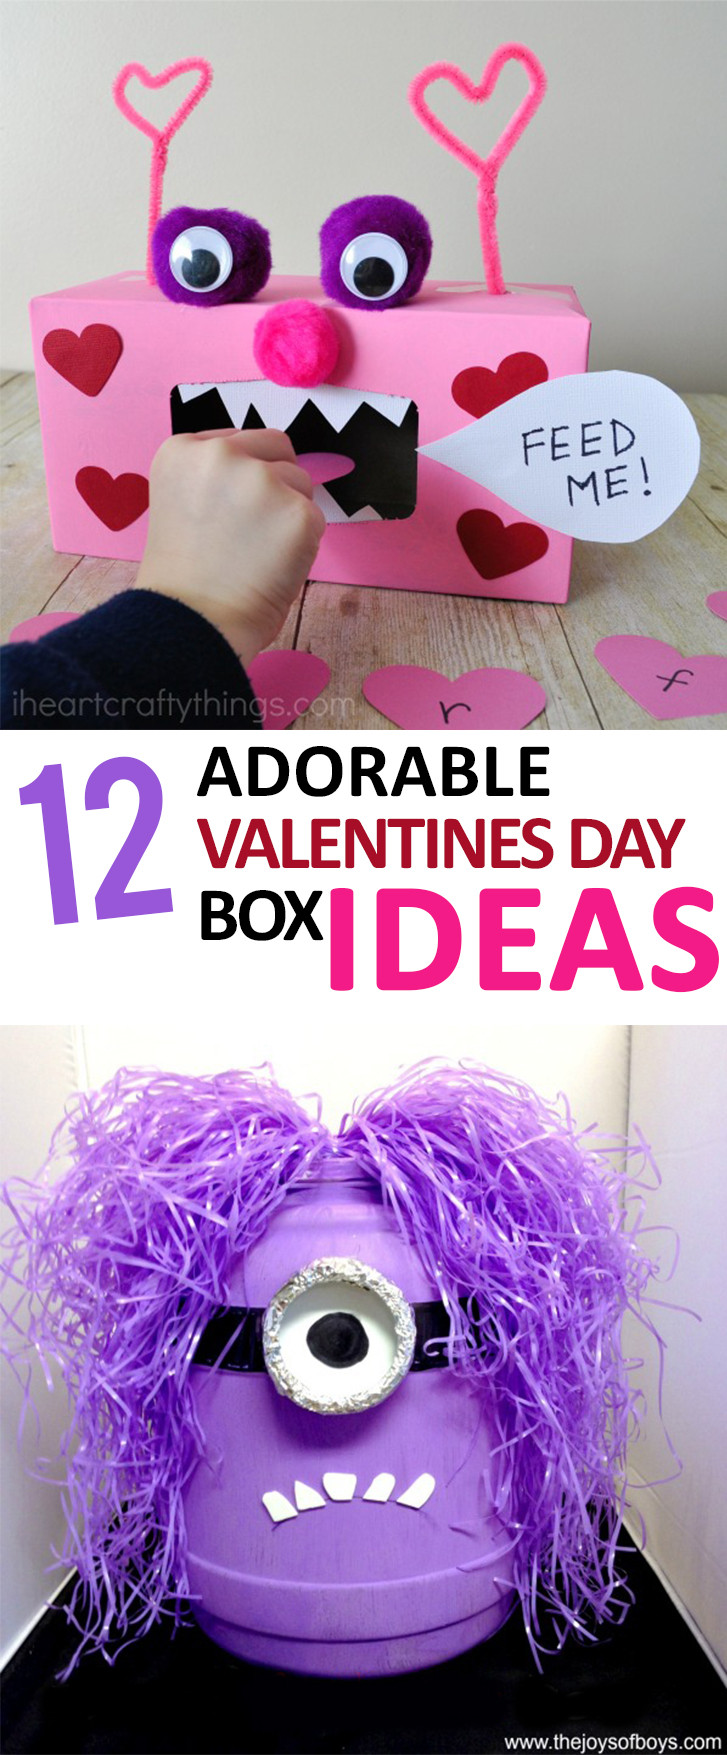 Valentines Day Boxes Ideas Fresh 12 Adorable Valentines Day Box Ideas – Sunlit Spaces